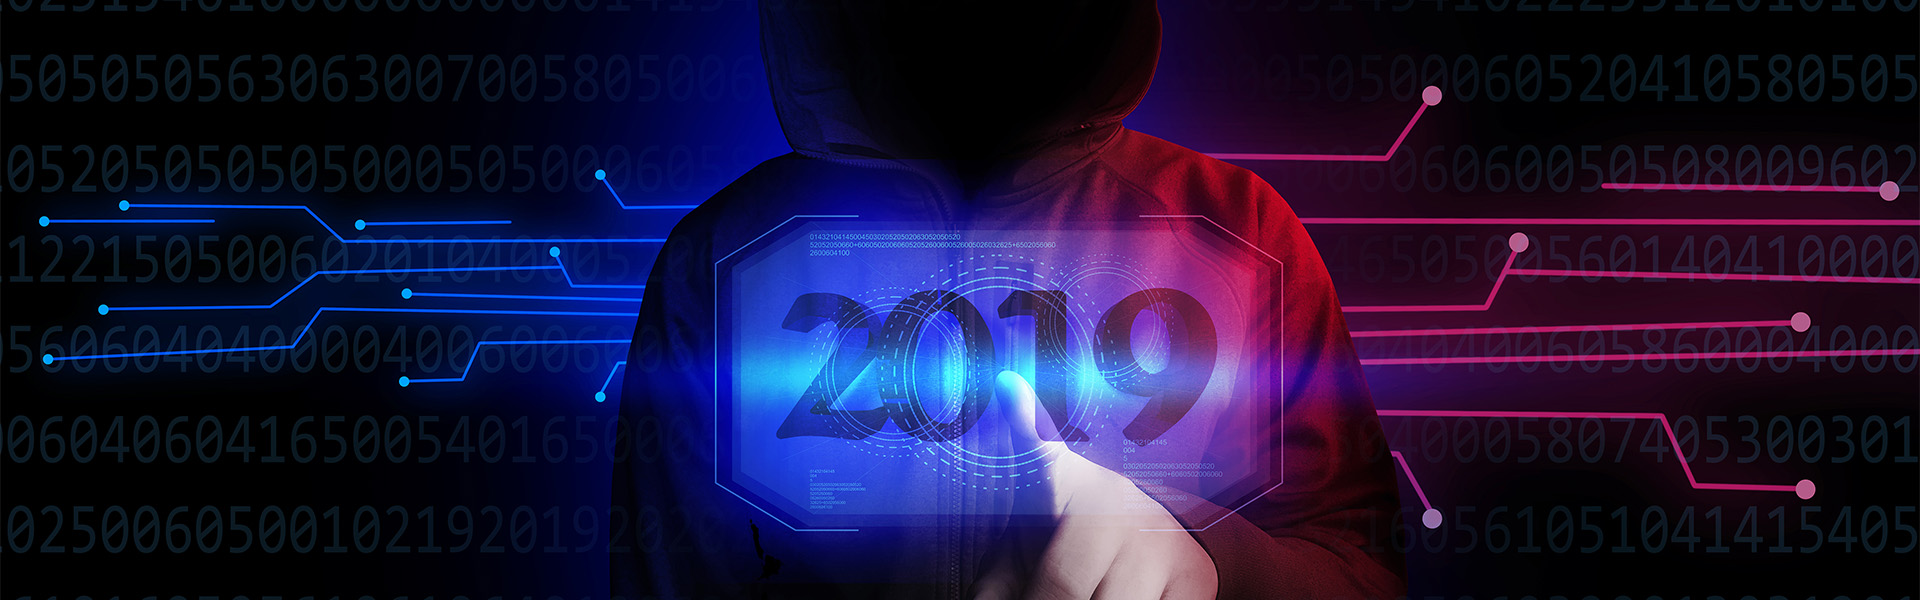 Cyber-security ranks as 2019 top organisational risk